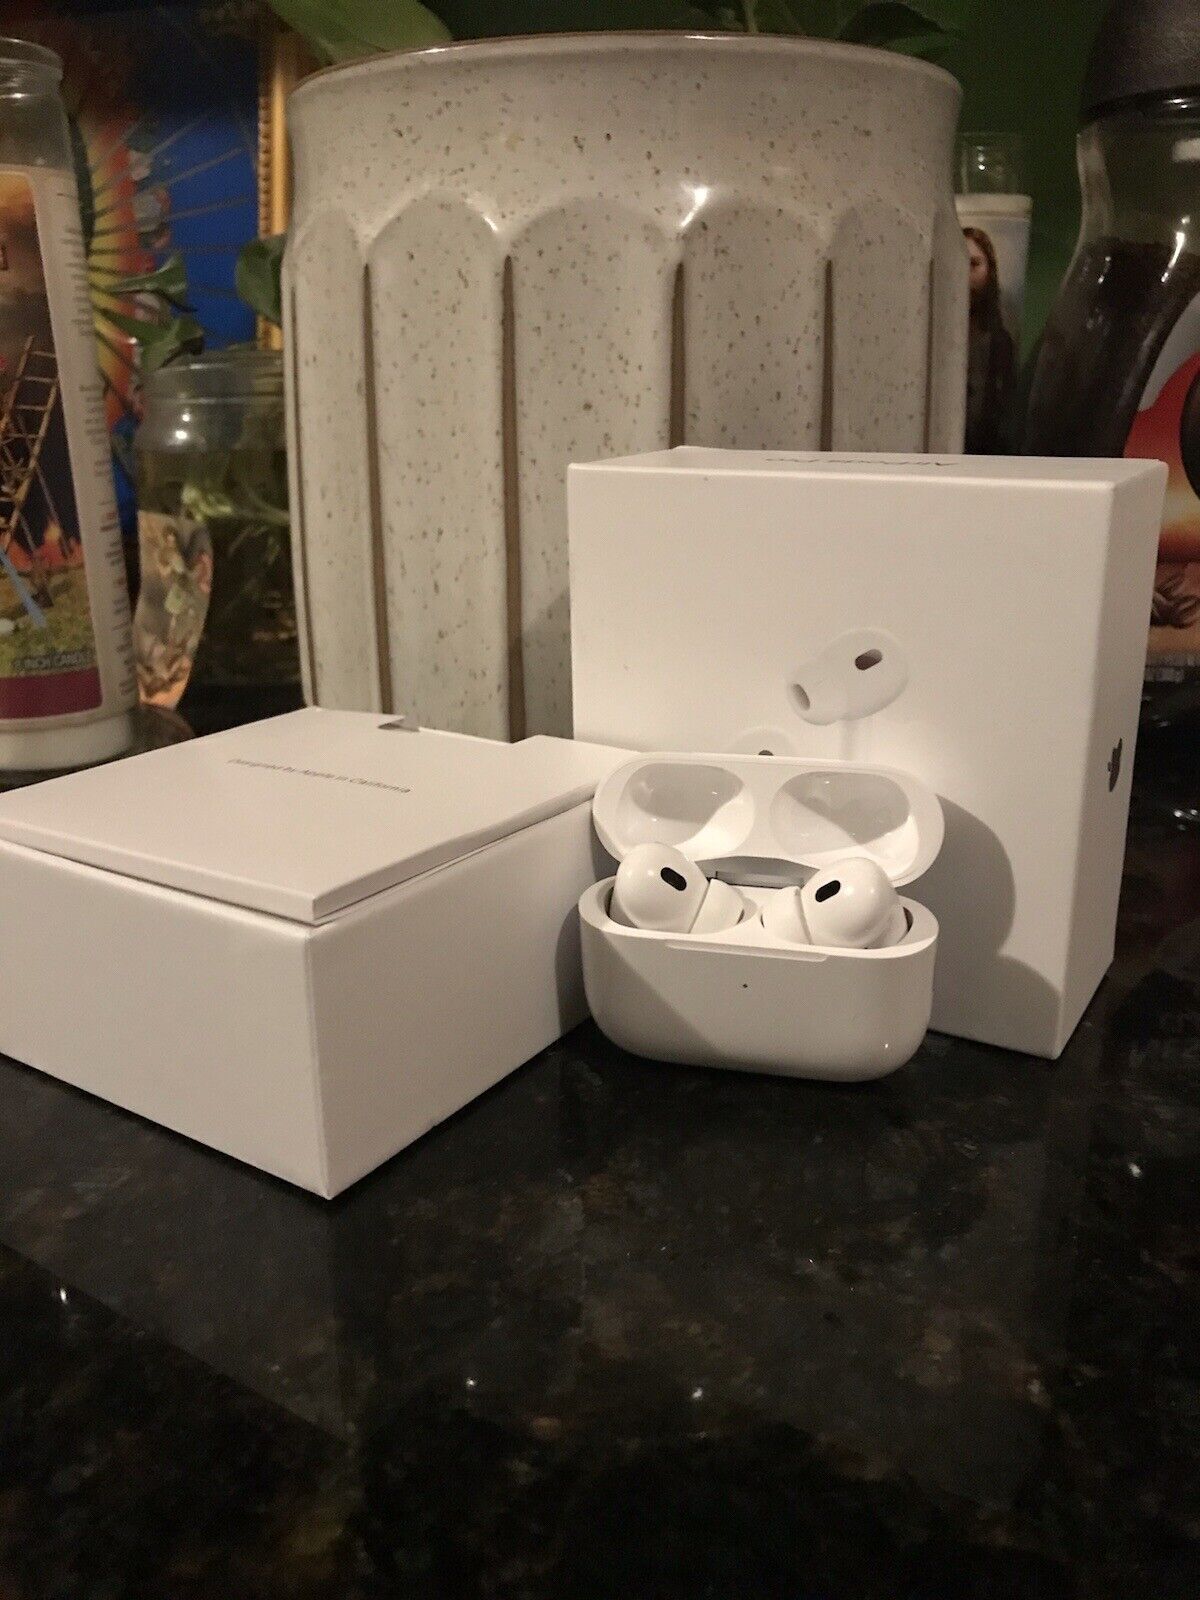 AirPods Pro 2nd Generation Wireless Earbuds with MagSafe Charging Case